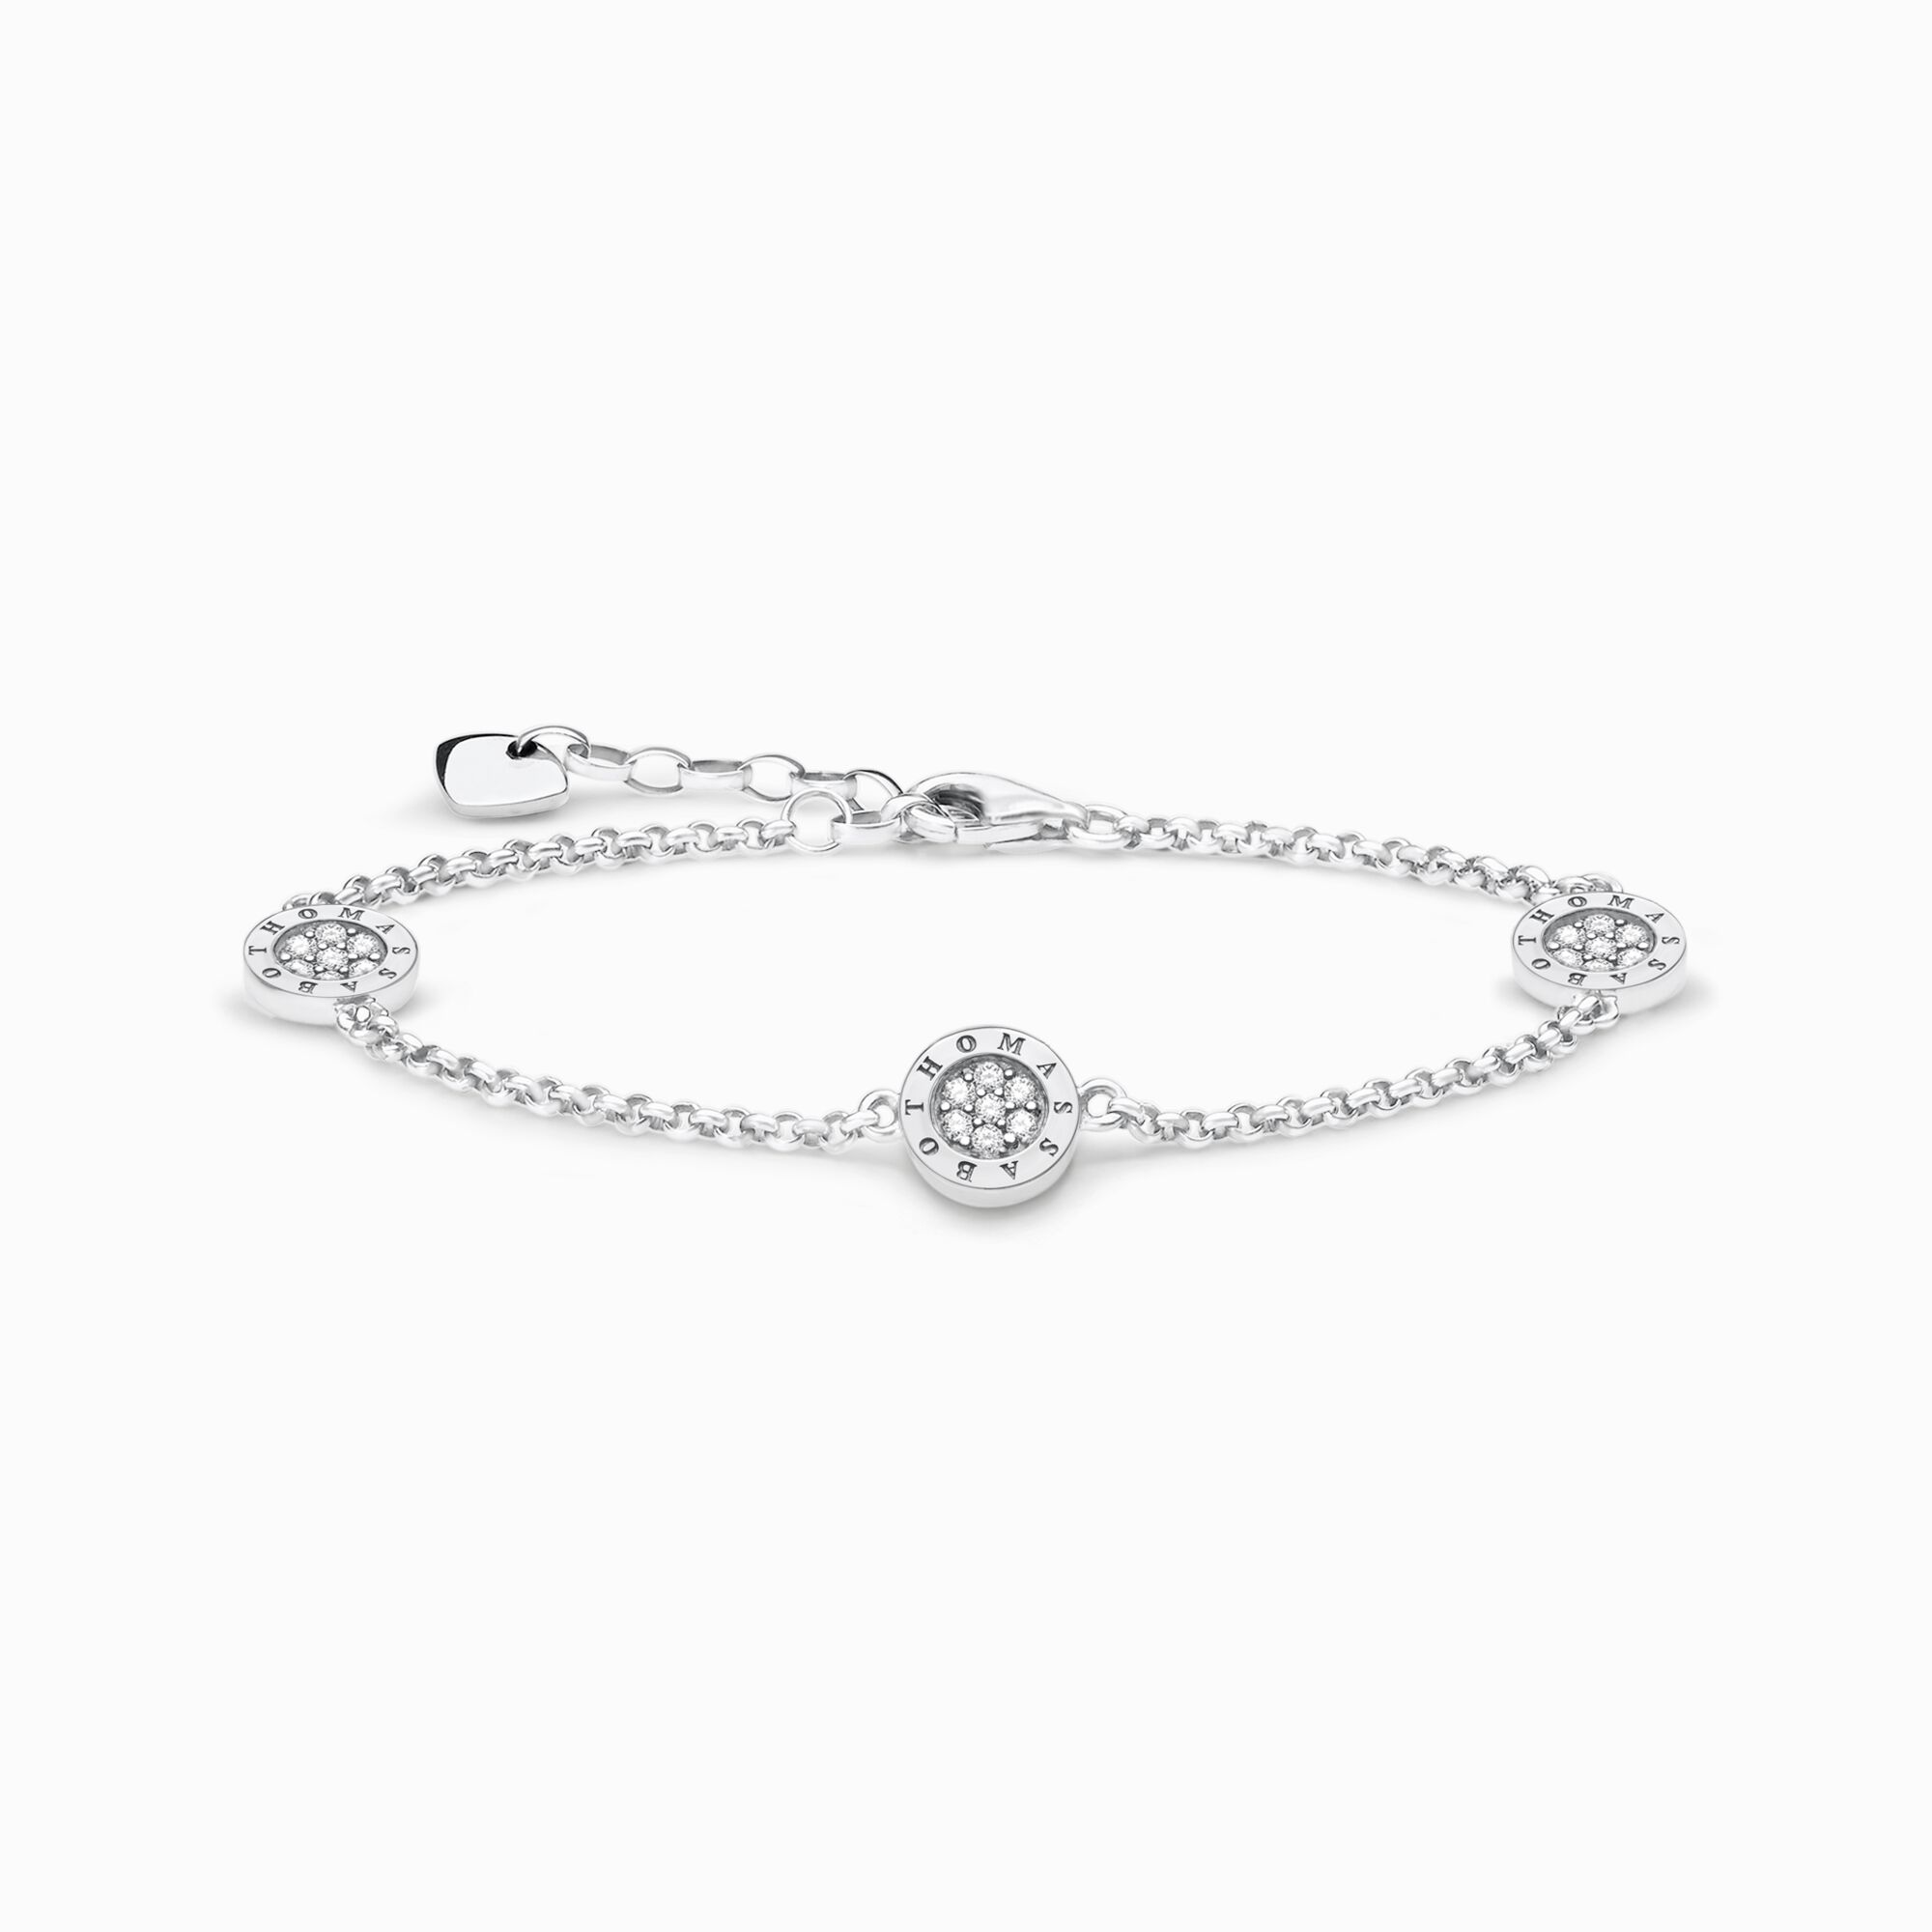 Bracelet classic pav&eacute; from the  collection in the THOMAS SABO online store